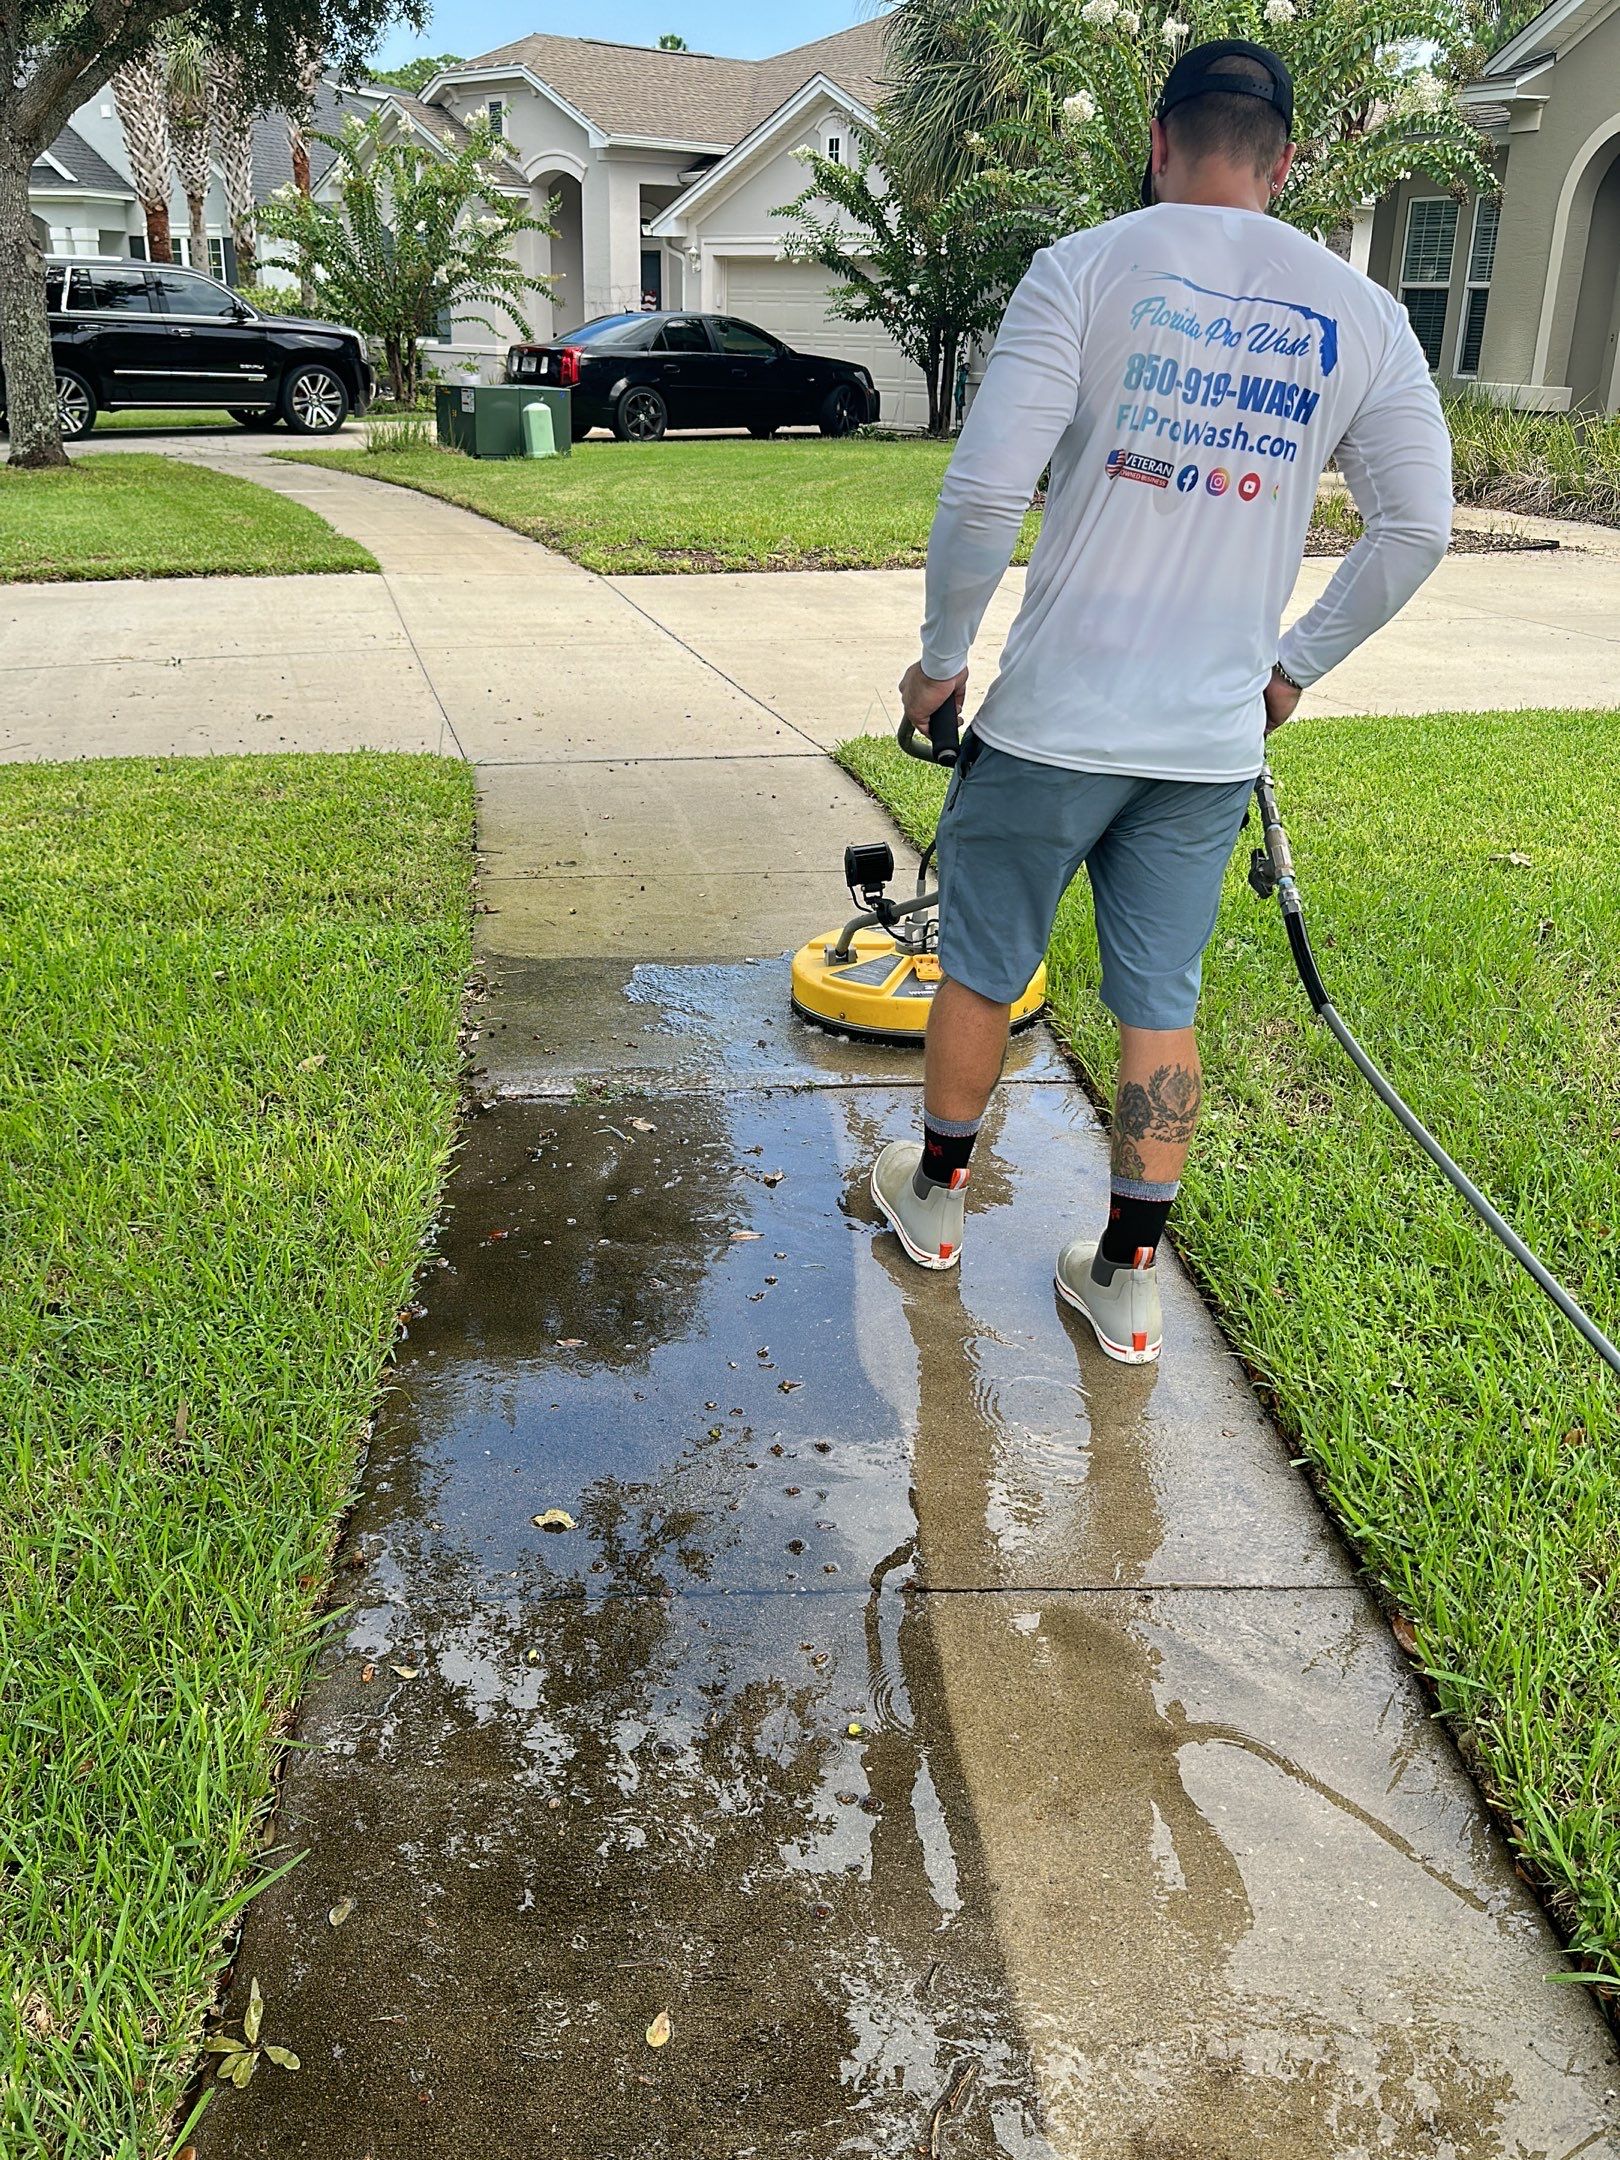 Florida Pro Wash Brings Pristine Excellence in Pressure Washing to Panama City Beach, FL